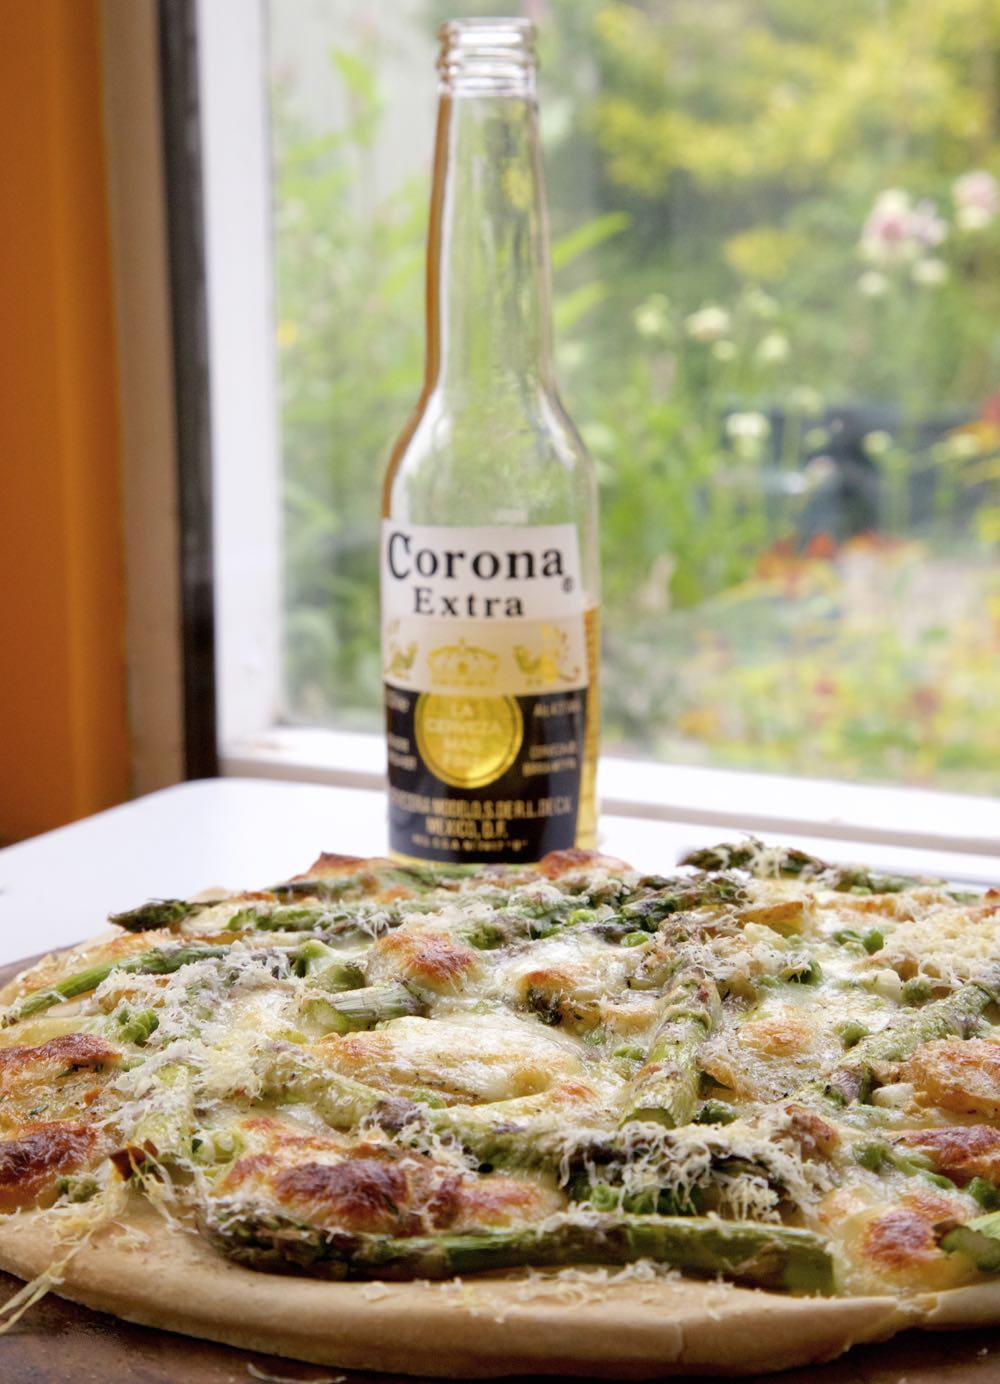 Asparagus Pizza with Jersey Royal Potatoes, Spring Onions and Peas, served with beer.